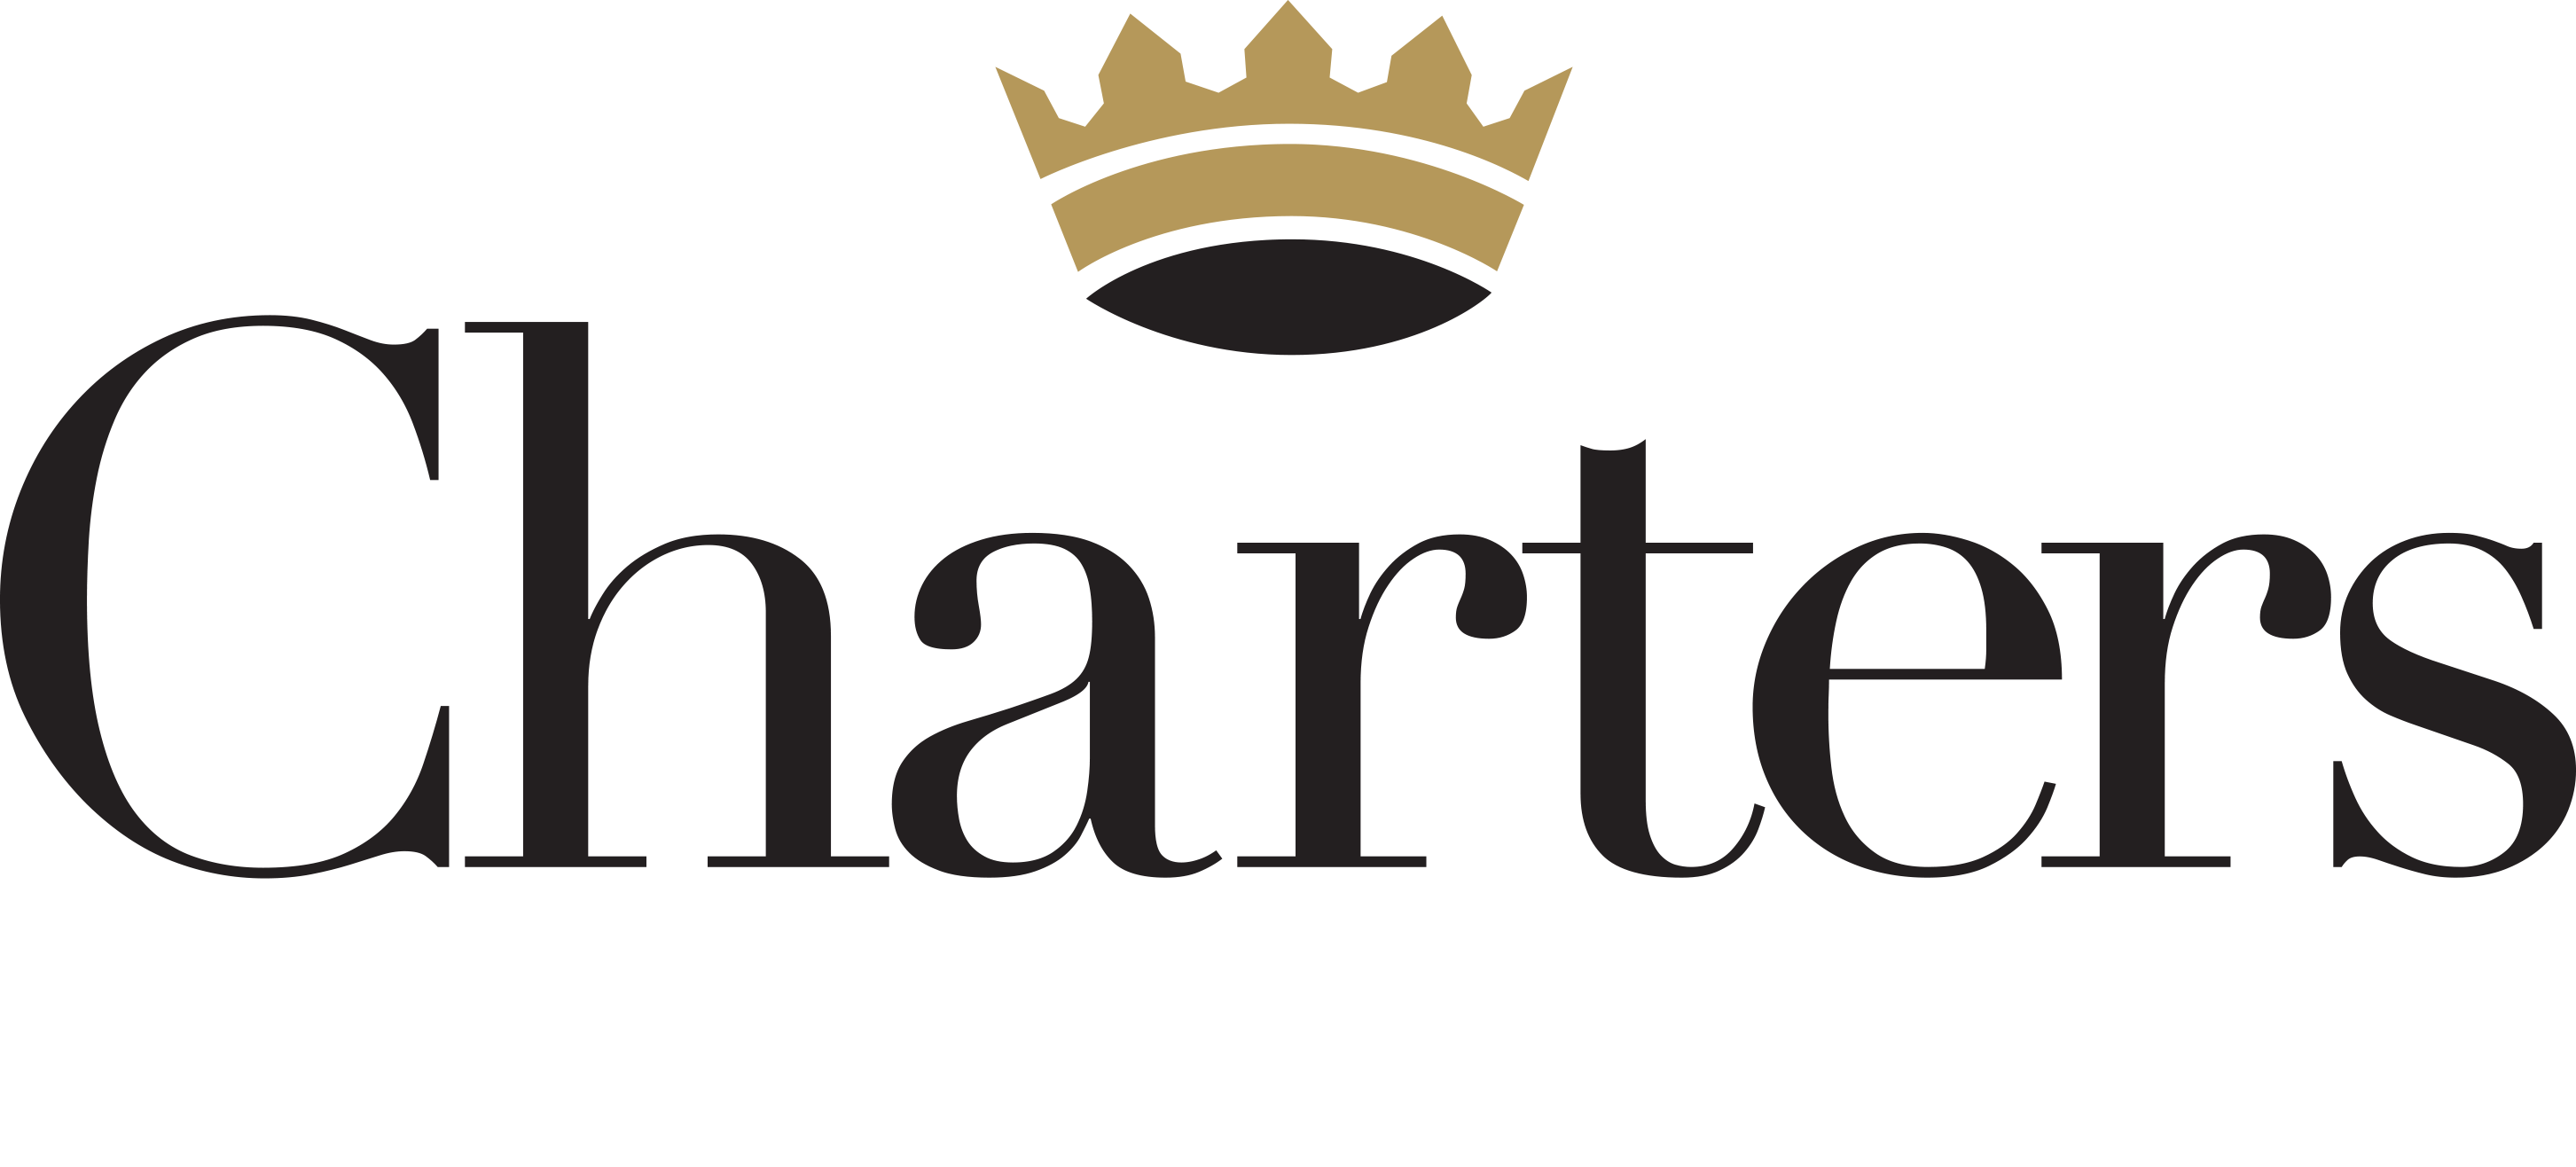 charters_new_green-logo.png